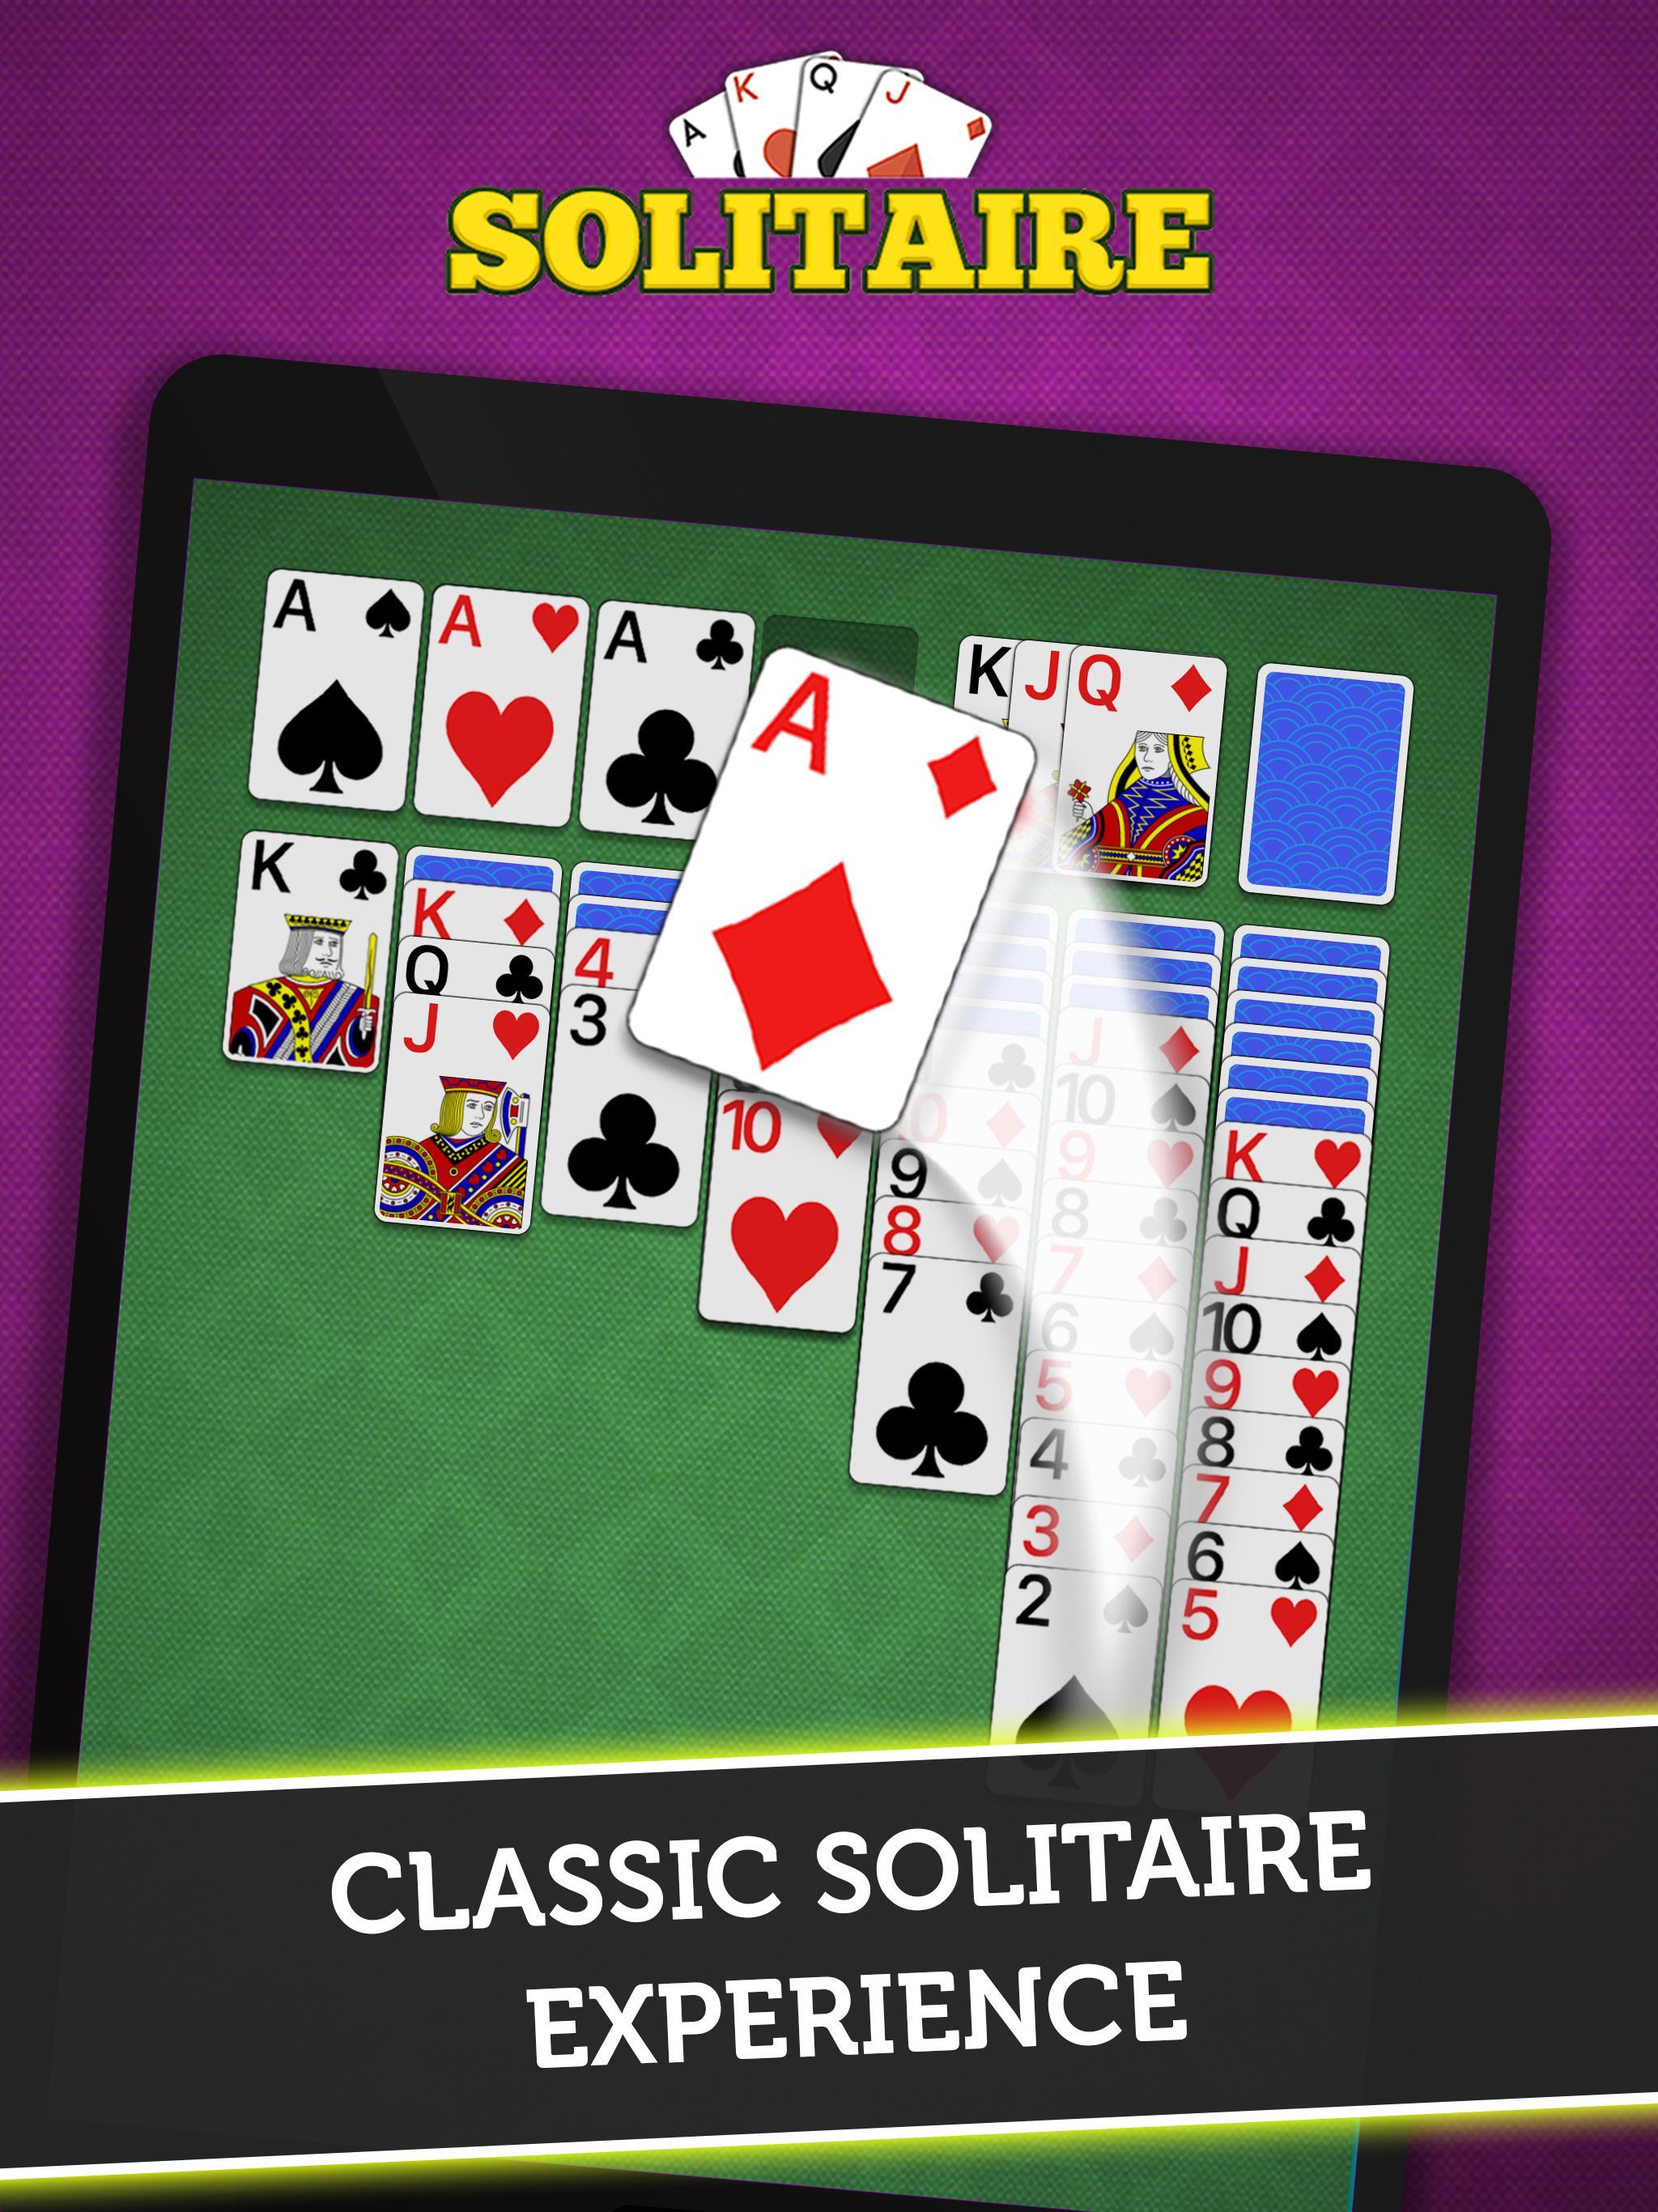 Classic Solitaire 2020 - Free Card Game 1.152.0 Screenshot 7